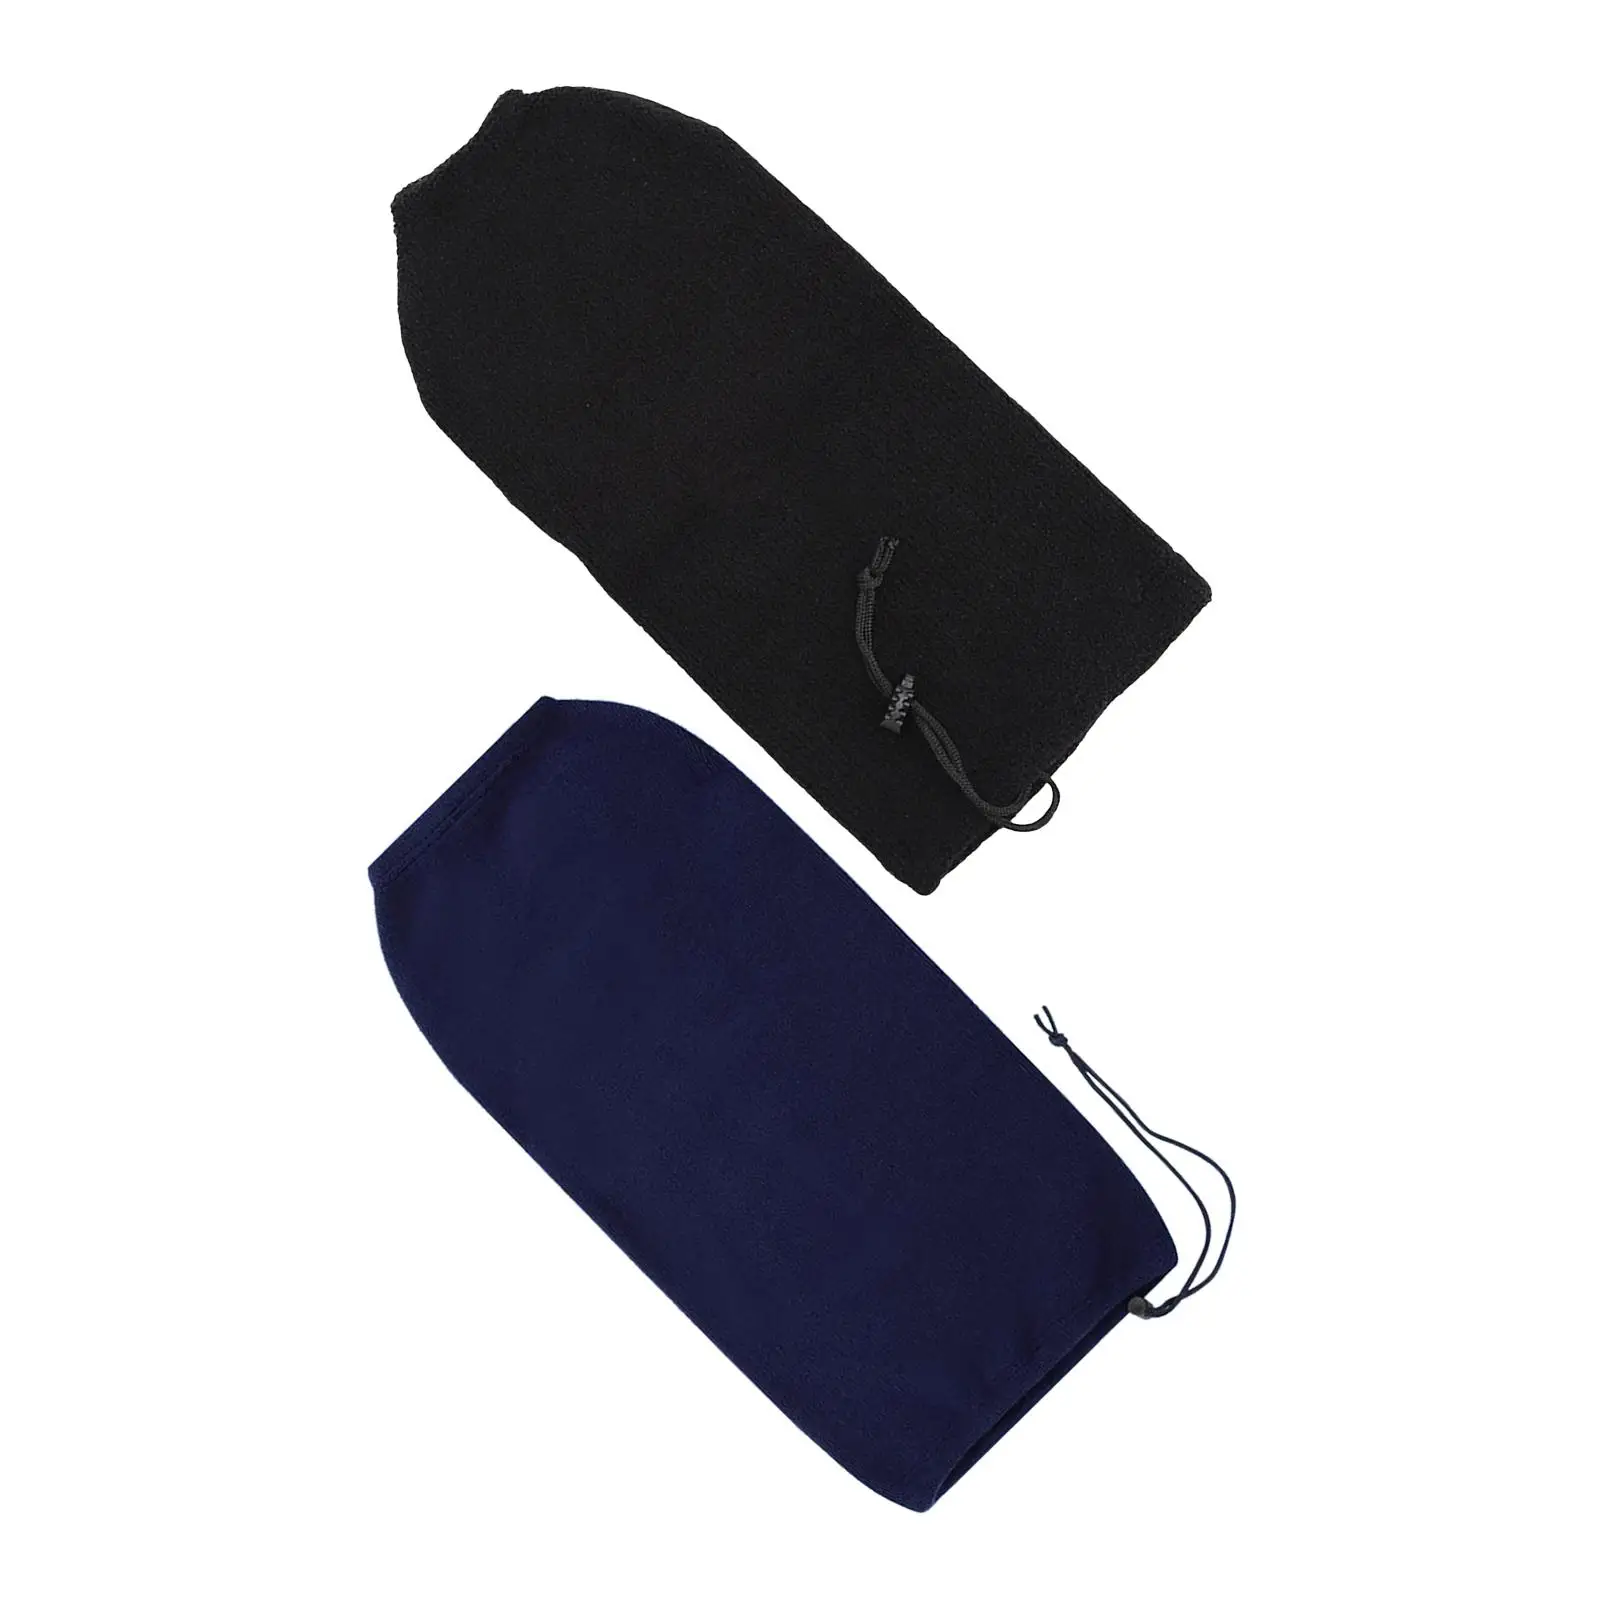 Boat Fender Cover Protective Sleeve for Marine Sailing Boat Yacht